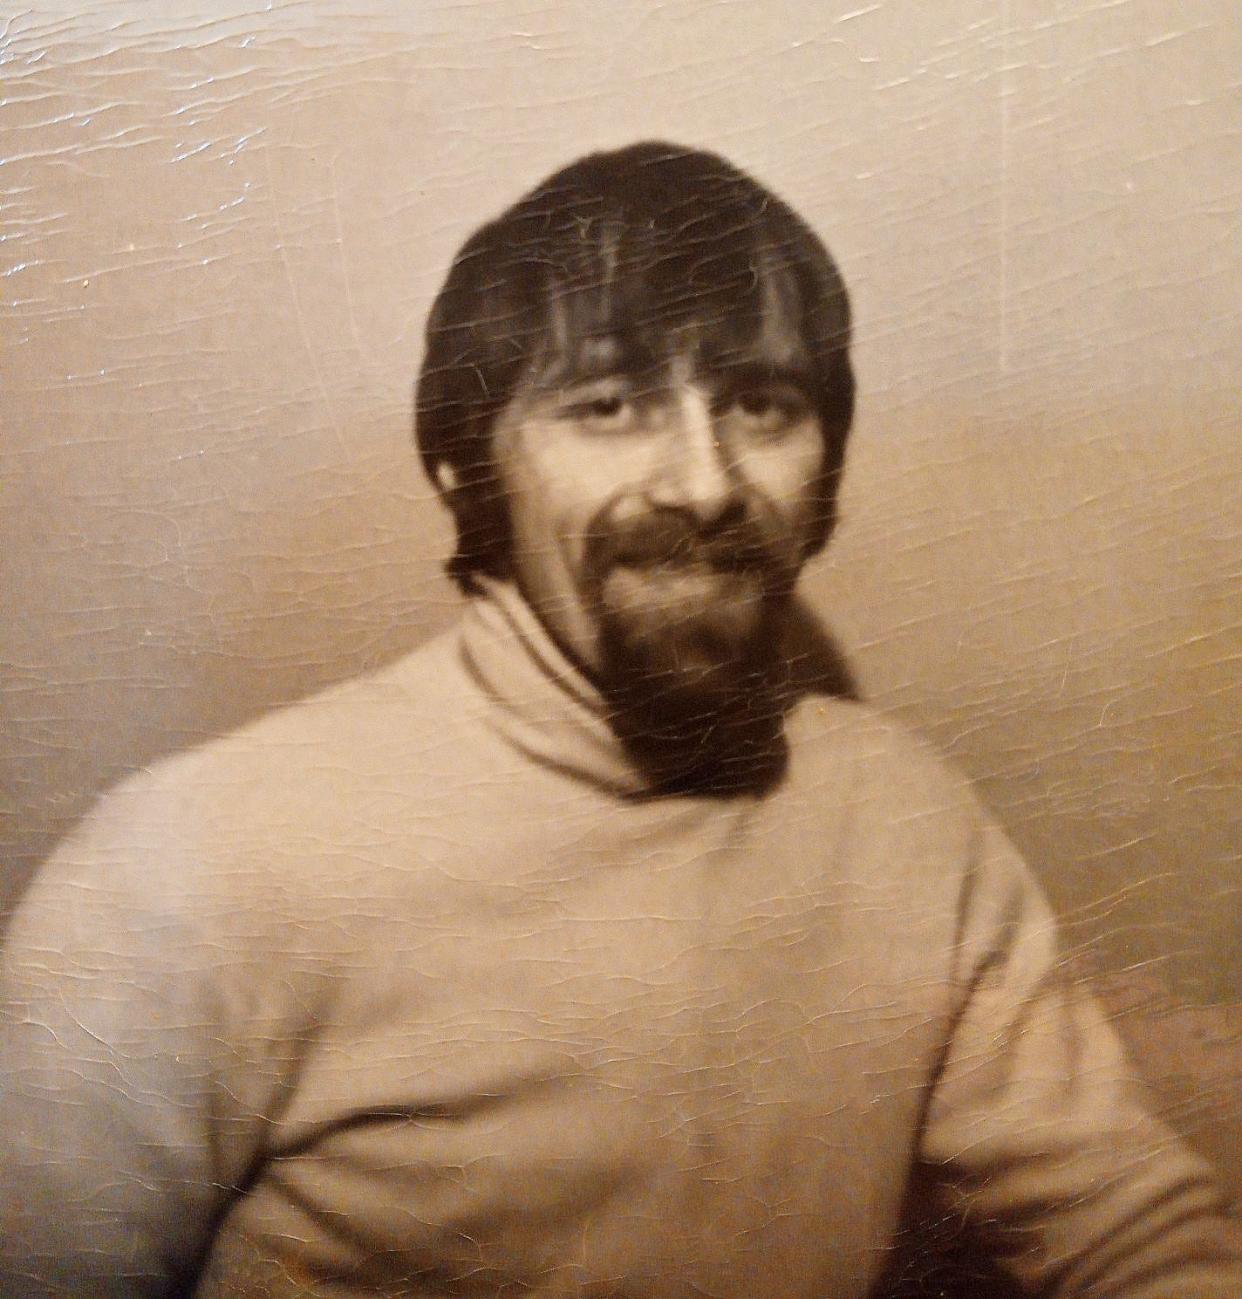 The author became good friends with Daniel R. Janosik Sr. (1944-1995) in 1973. Often signing his name as DanJ, he was known as Danny. This picture of him was taken in 1975.